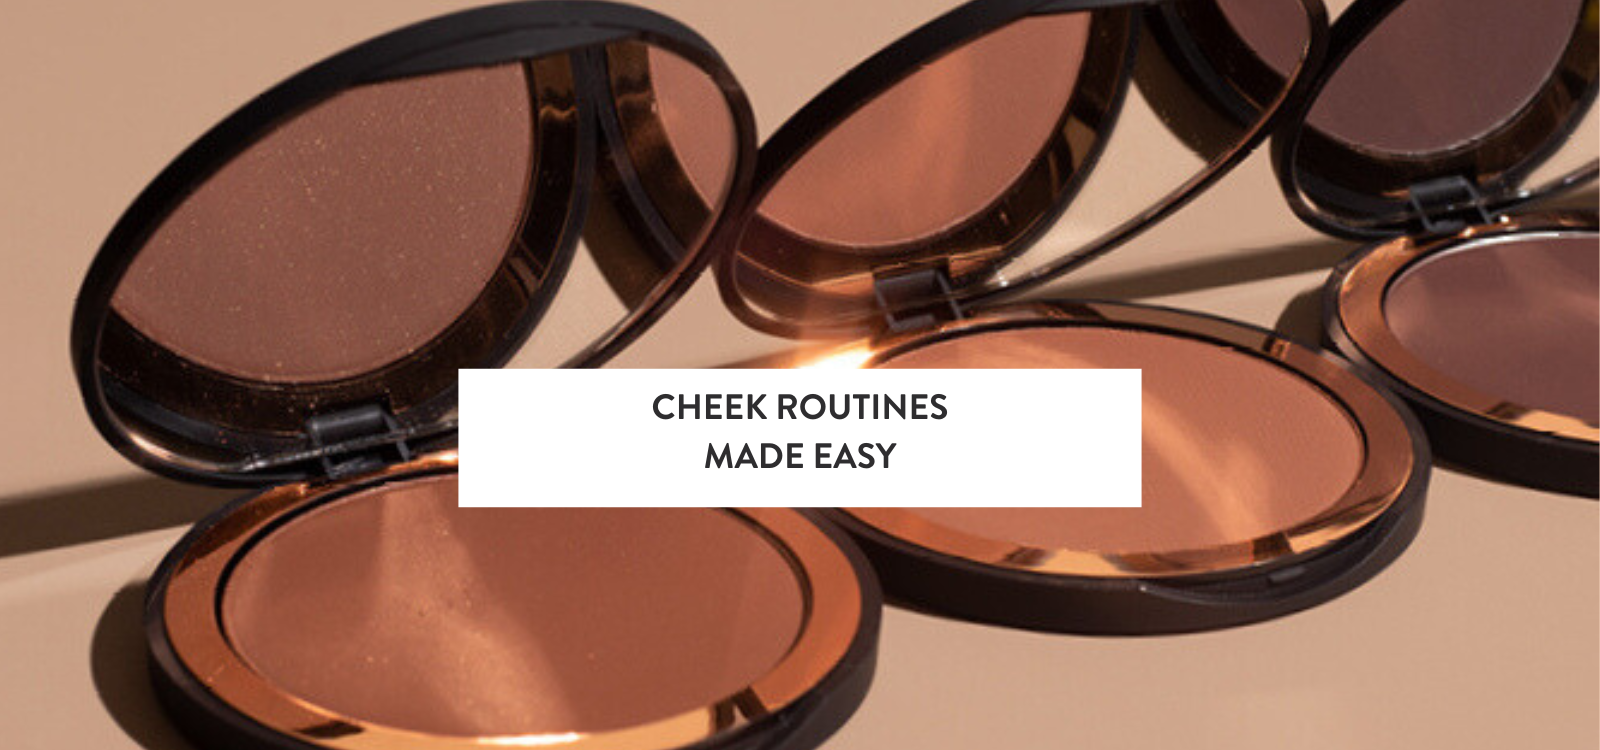 Cheek Routines Made Easy